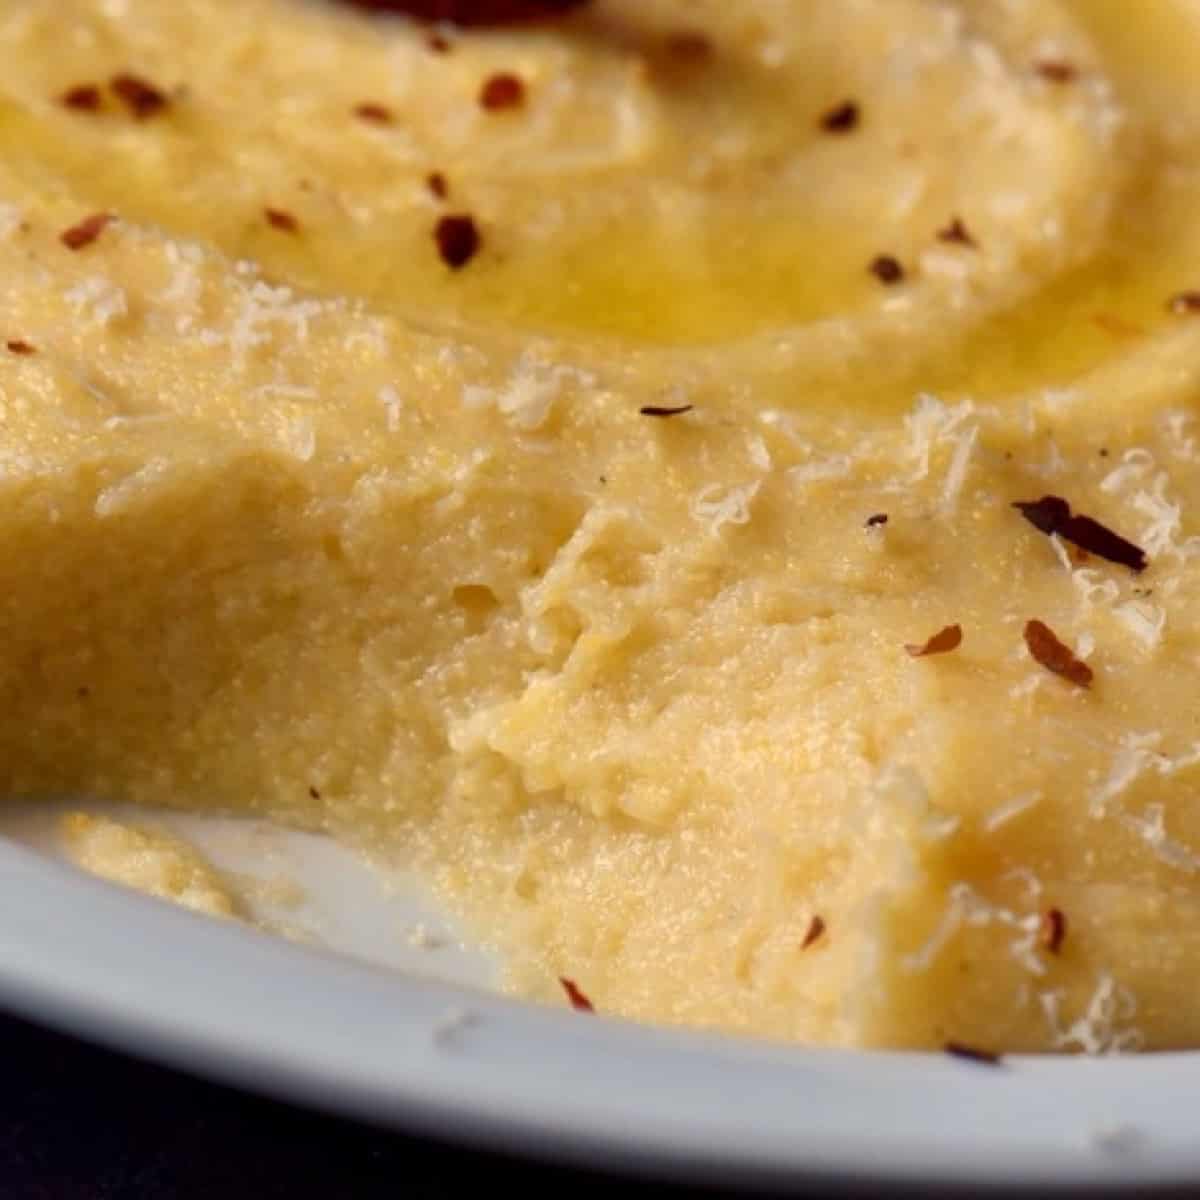 A close up shot of the creamy texture of freshly made Italian polenta.